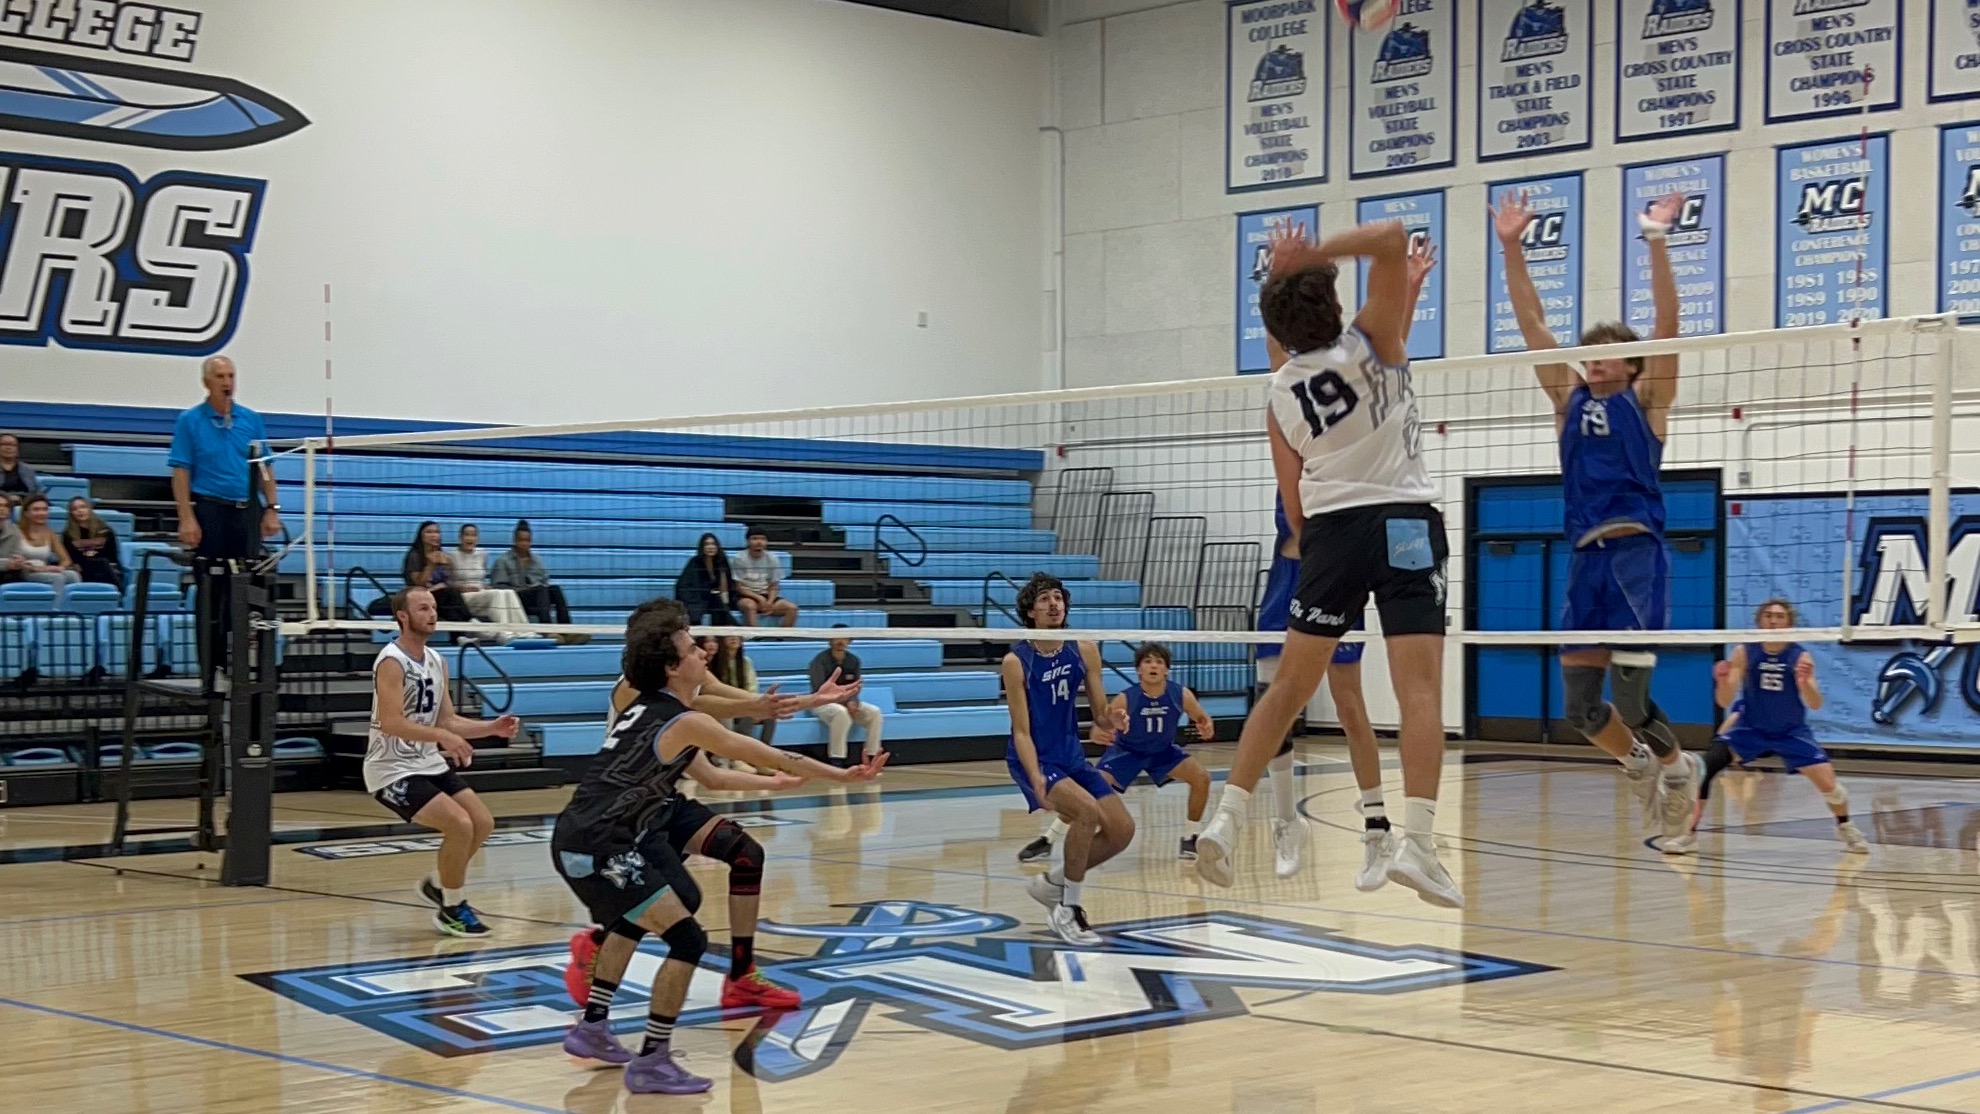 Men's Volleyball takes Santa Monica and Long Beach to 5 sets but drop both matches